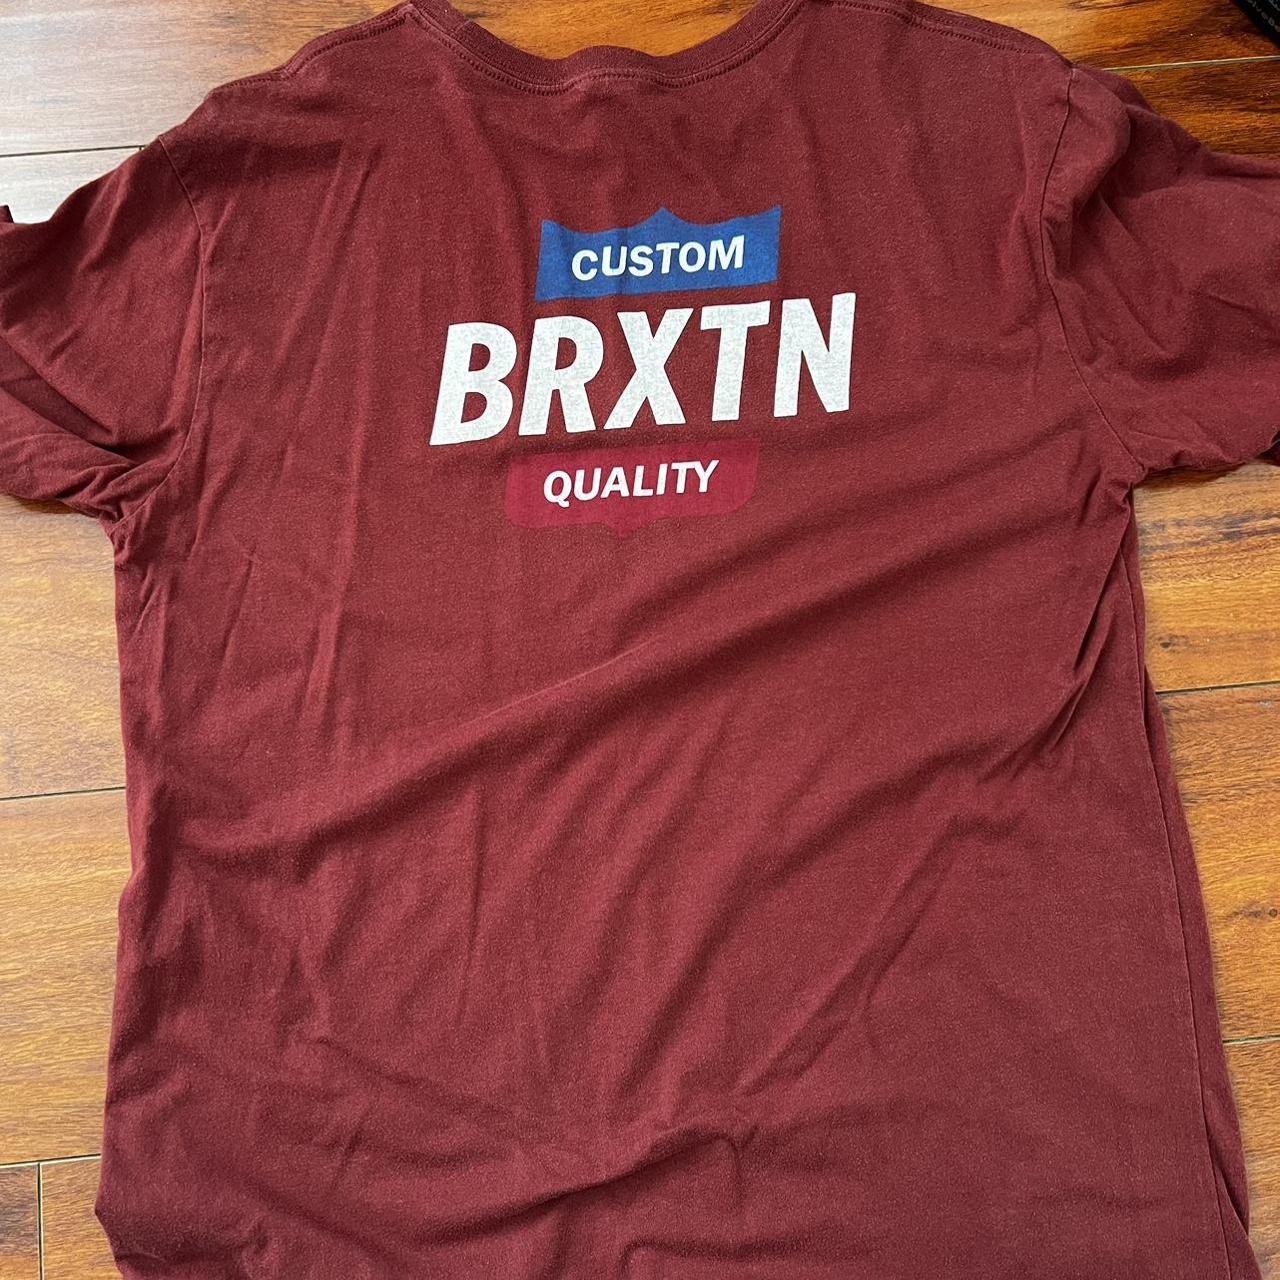 Brixton Men's Burgundy and Red T-shirt (2)